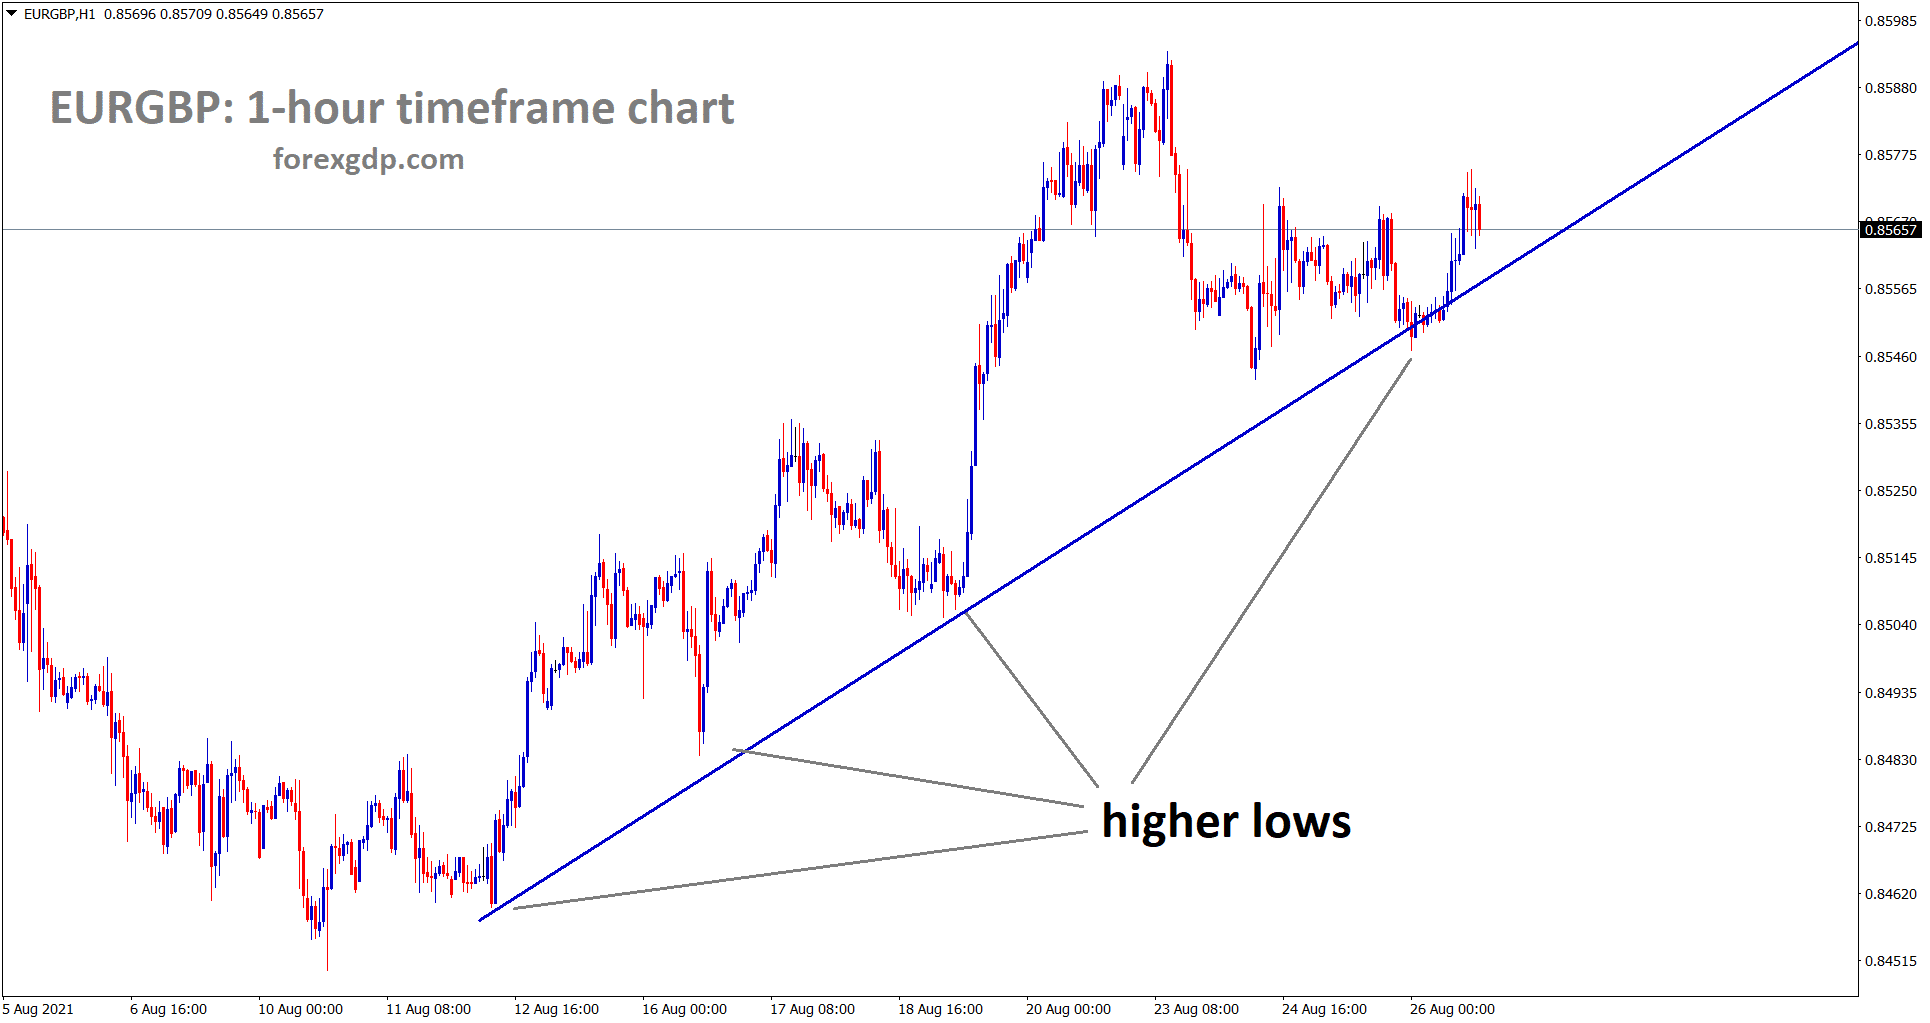 EURGBP is moving in an uptrend forming higher lows continuously